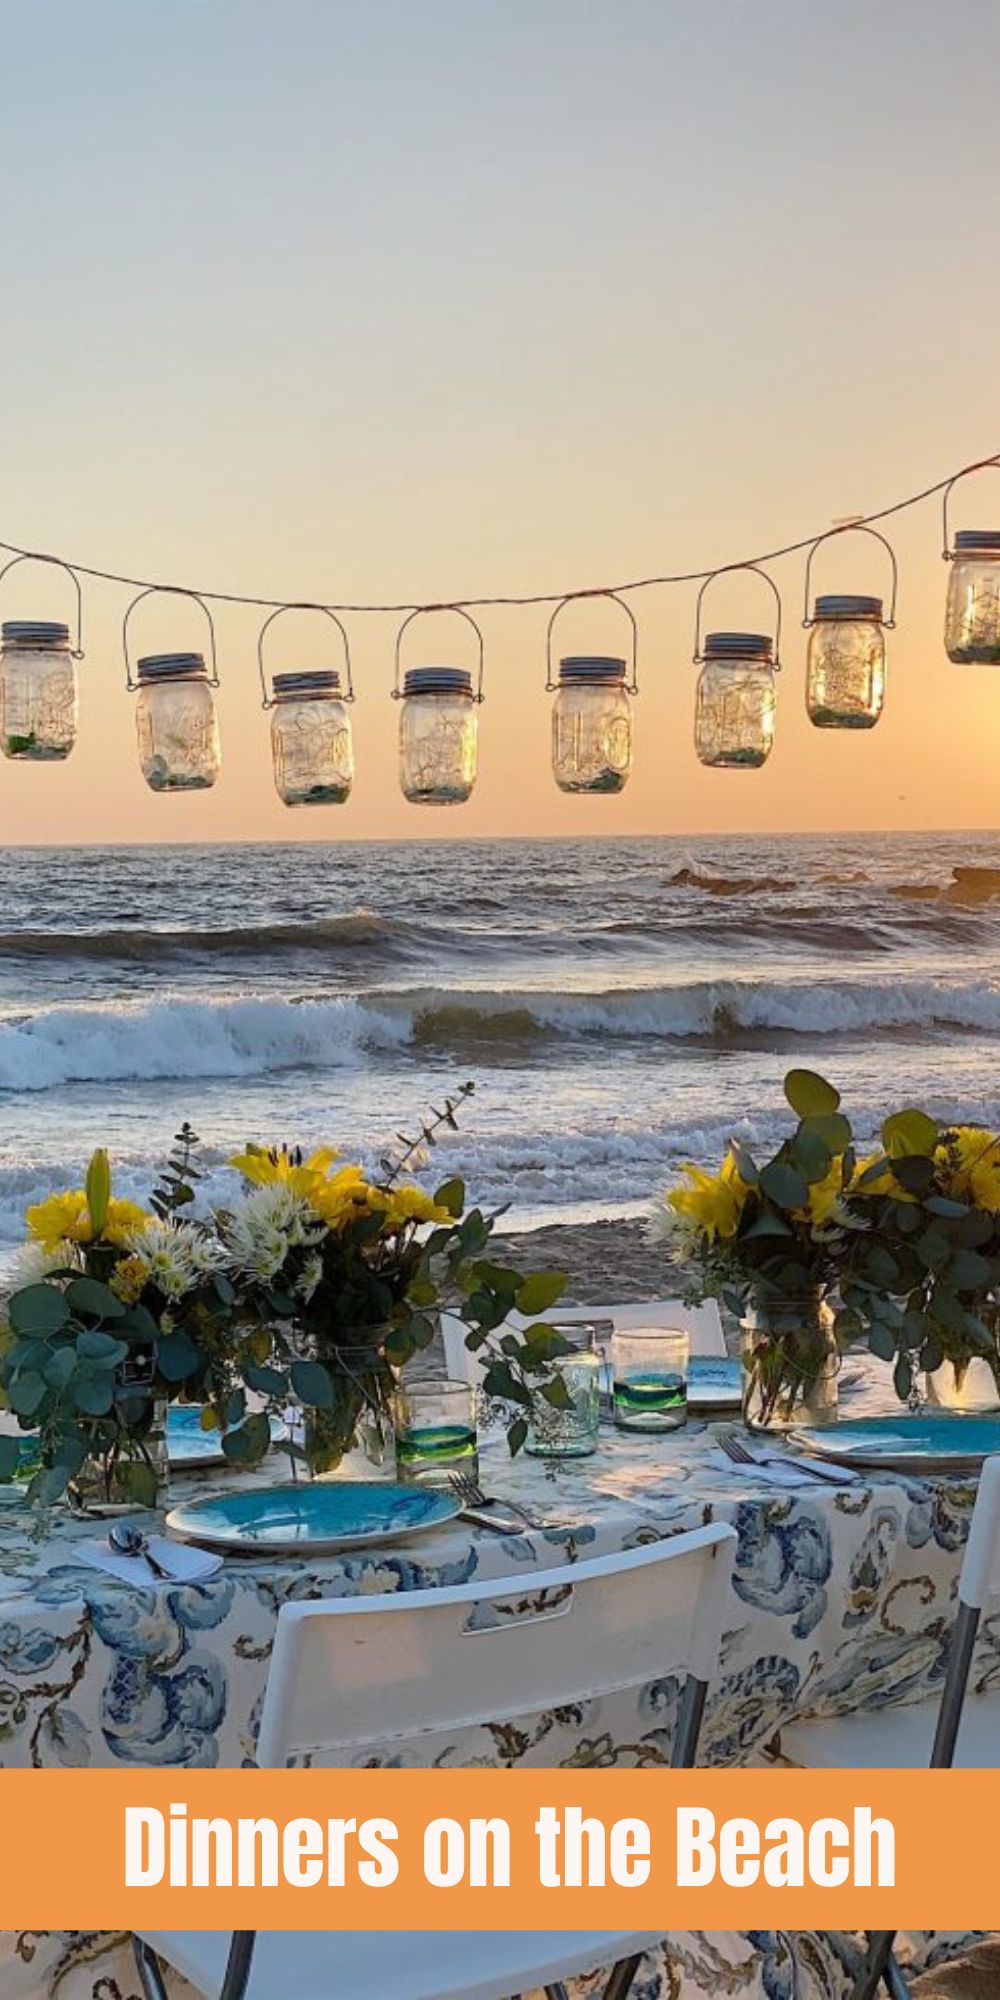 I love to entertain and serve dinners on the beach. The sunset provides an amazing backdrop for a fun dinner with friends and family.